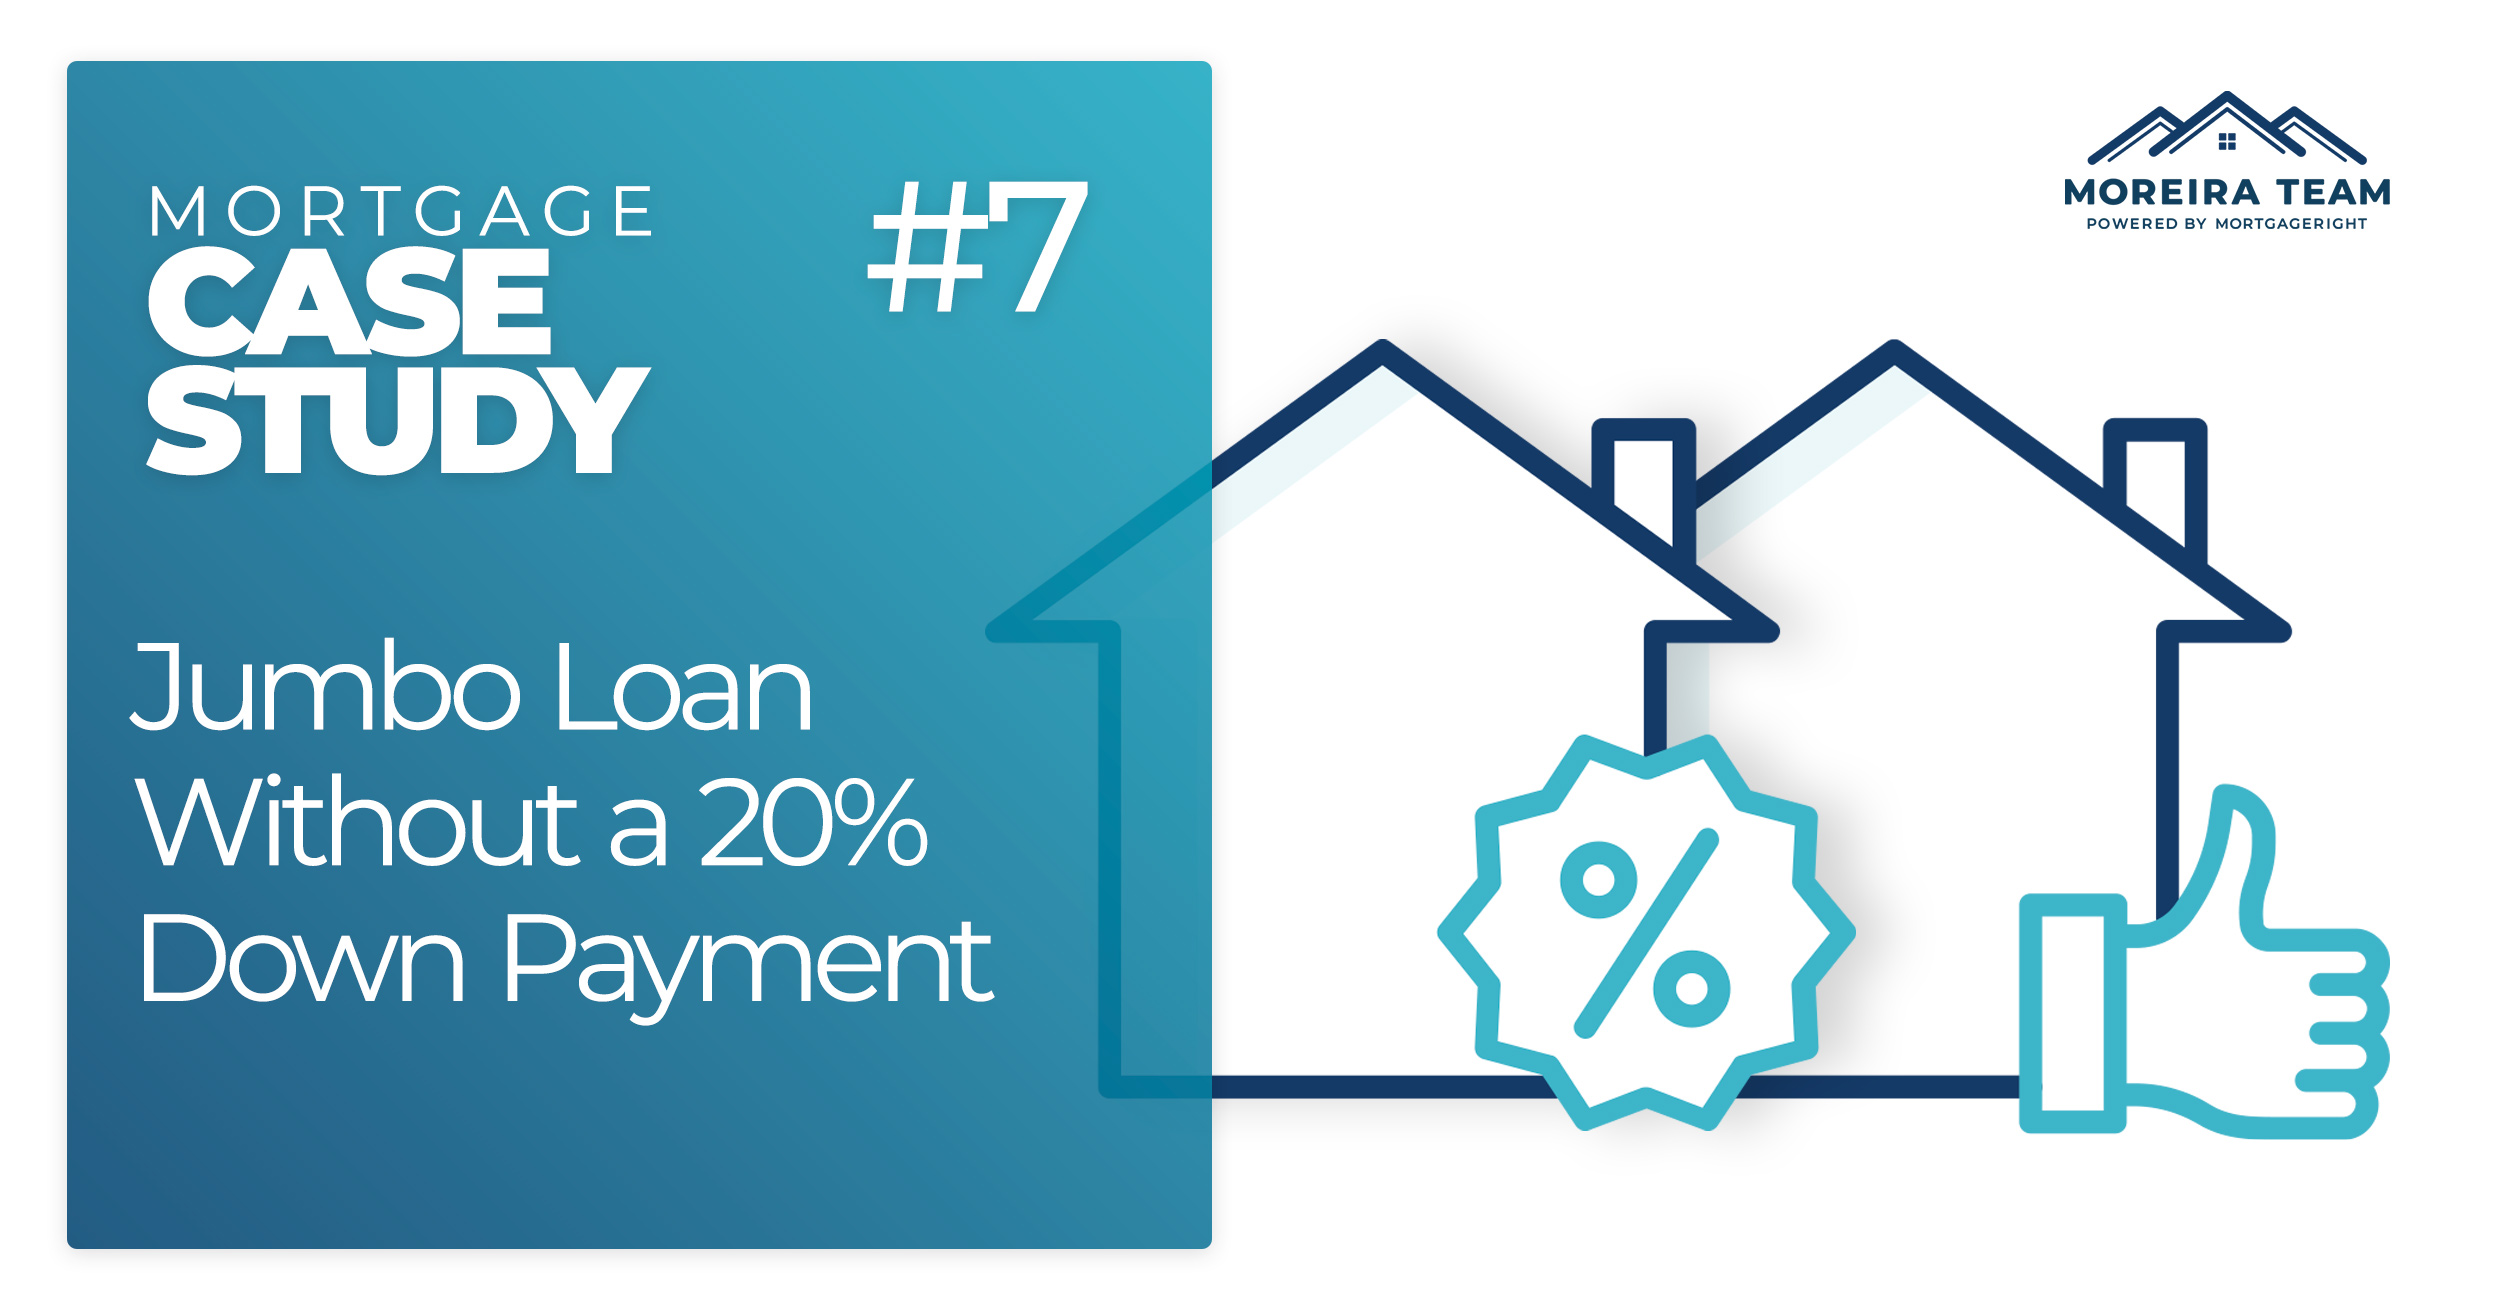 Mortgage Case Study - Jumbo Loan Without 20% Down